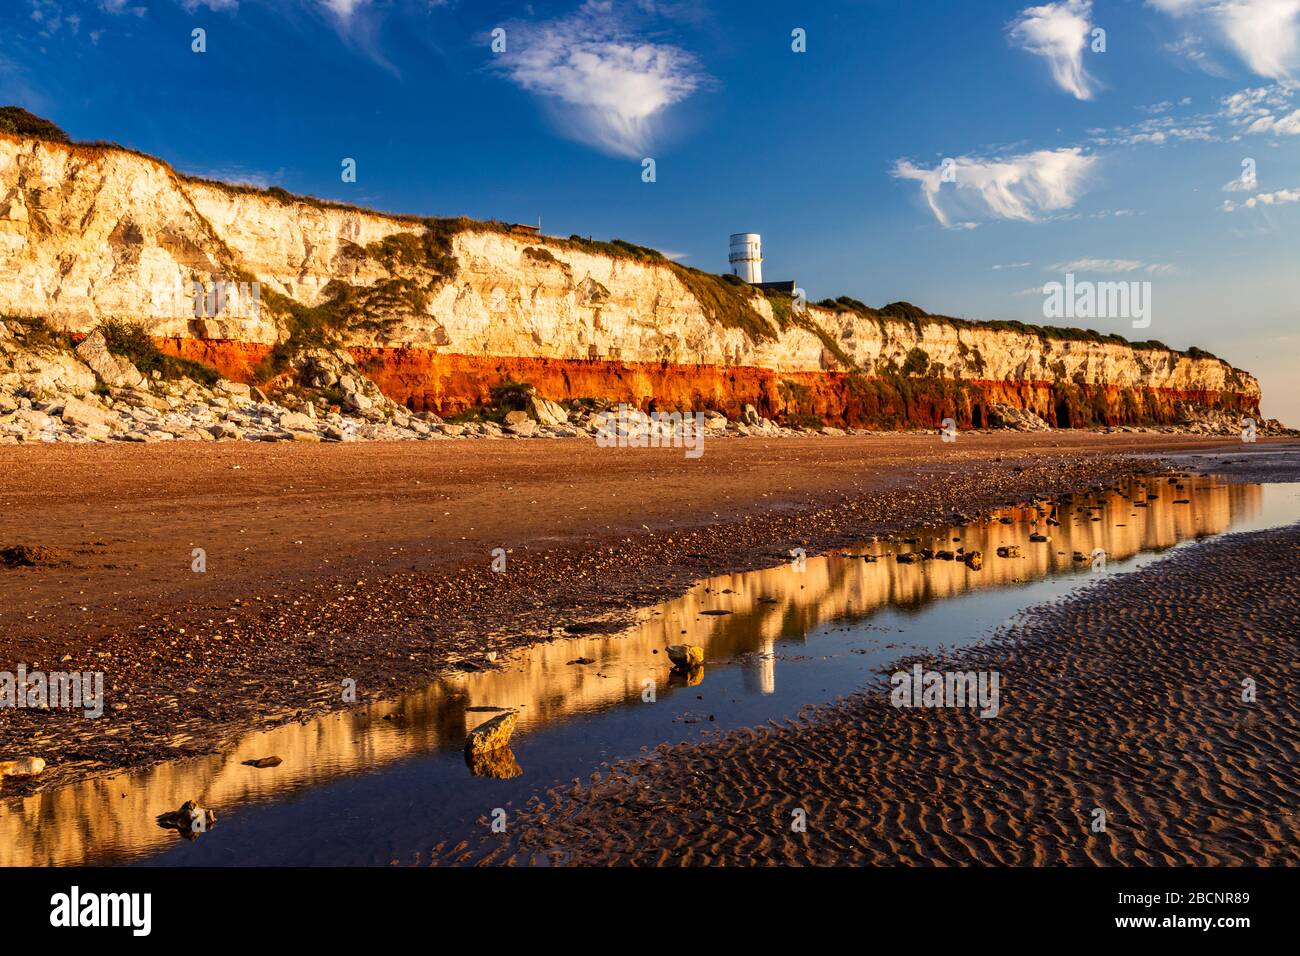 Sun setting on Hunstanton beach in north Norfolk east Anglia illuminating the colourful cliff face and lighthouse reflecting in the low tide pools Stock Photo